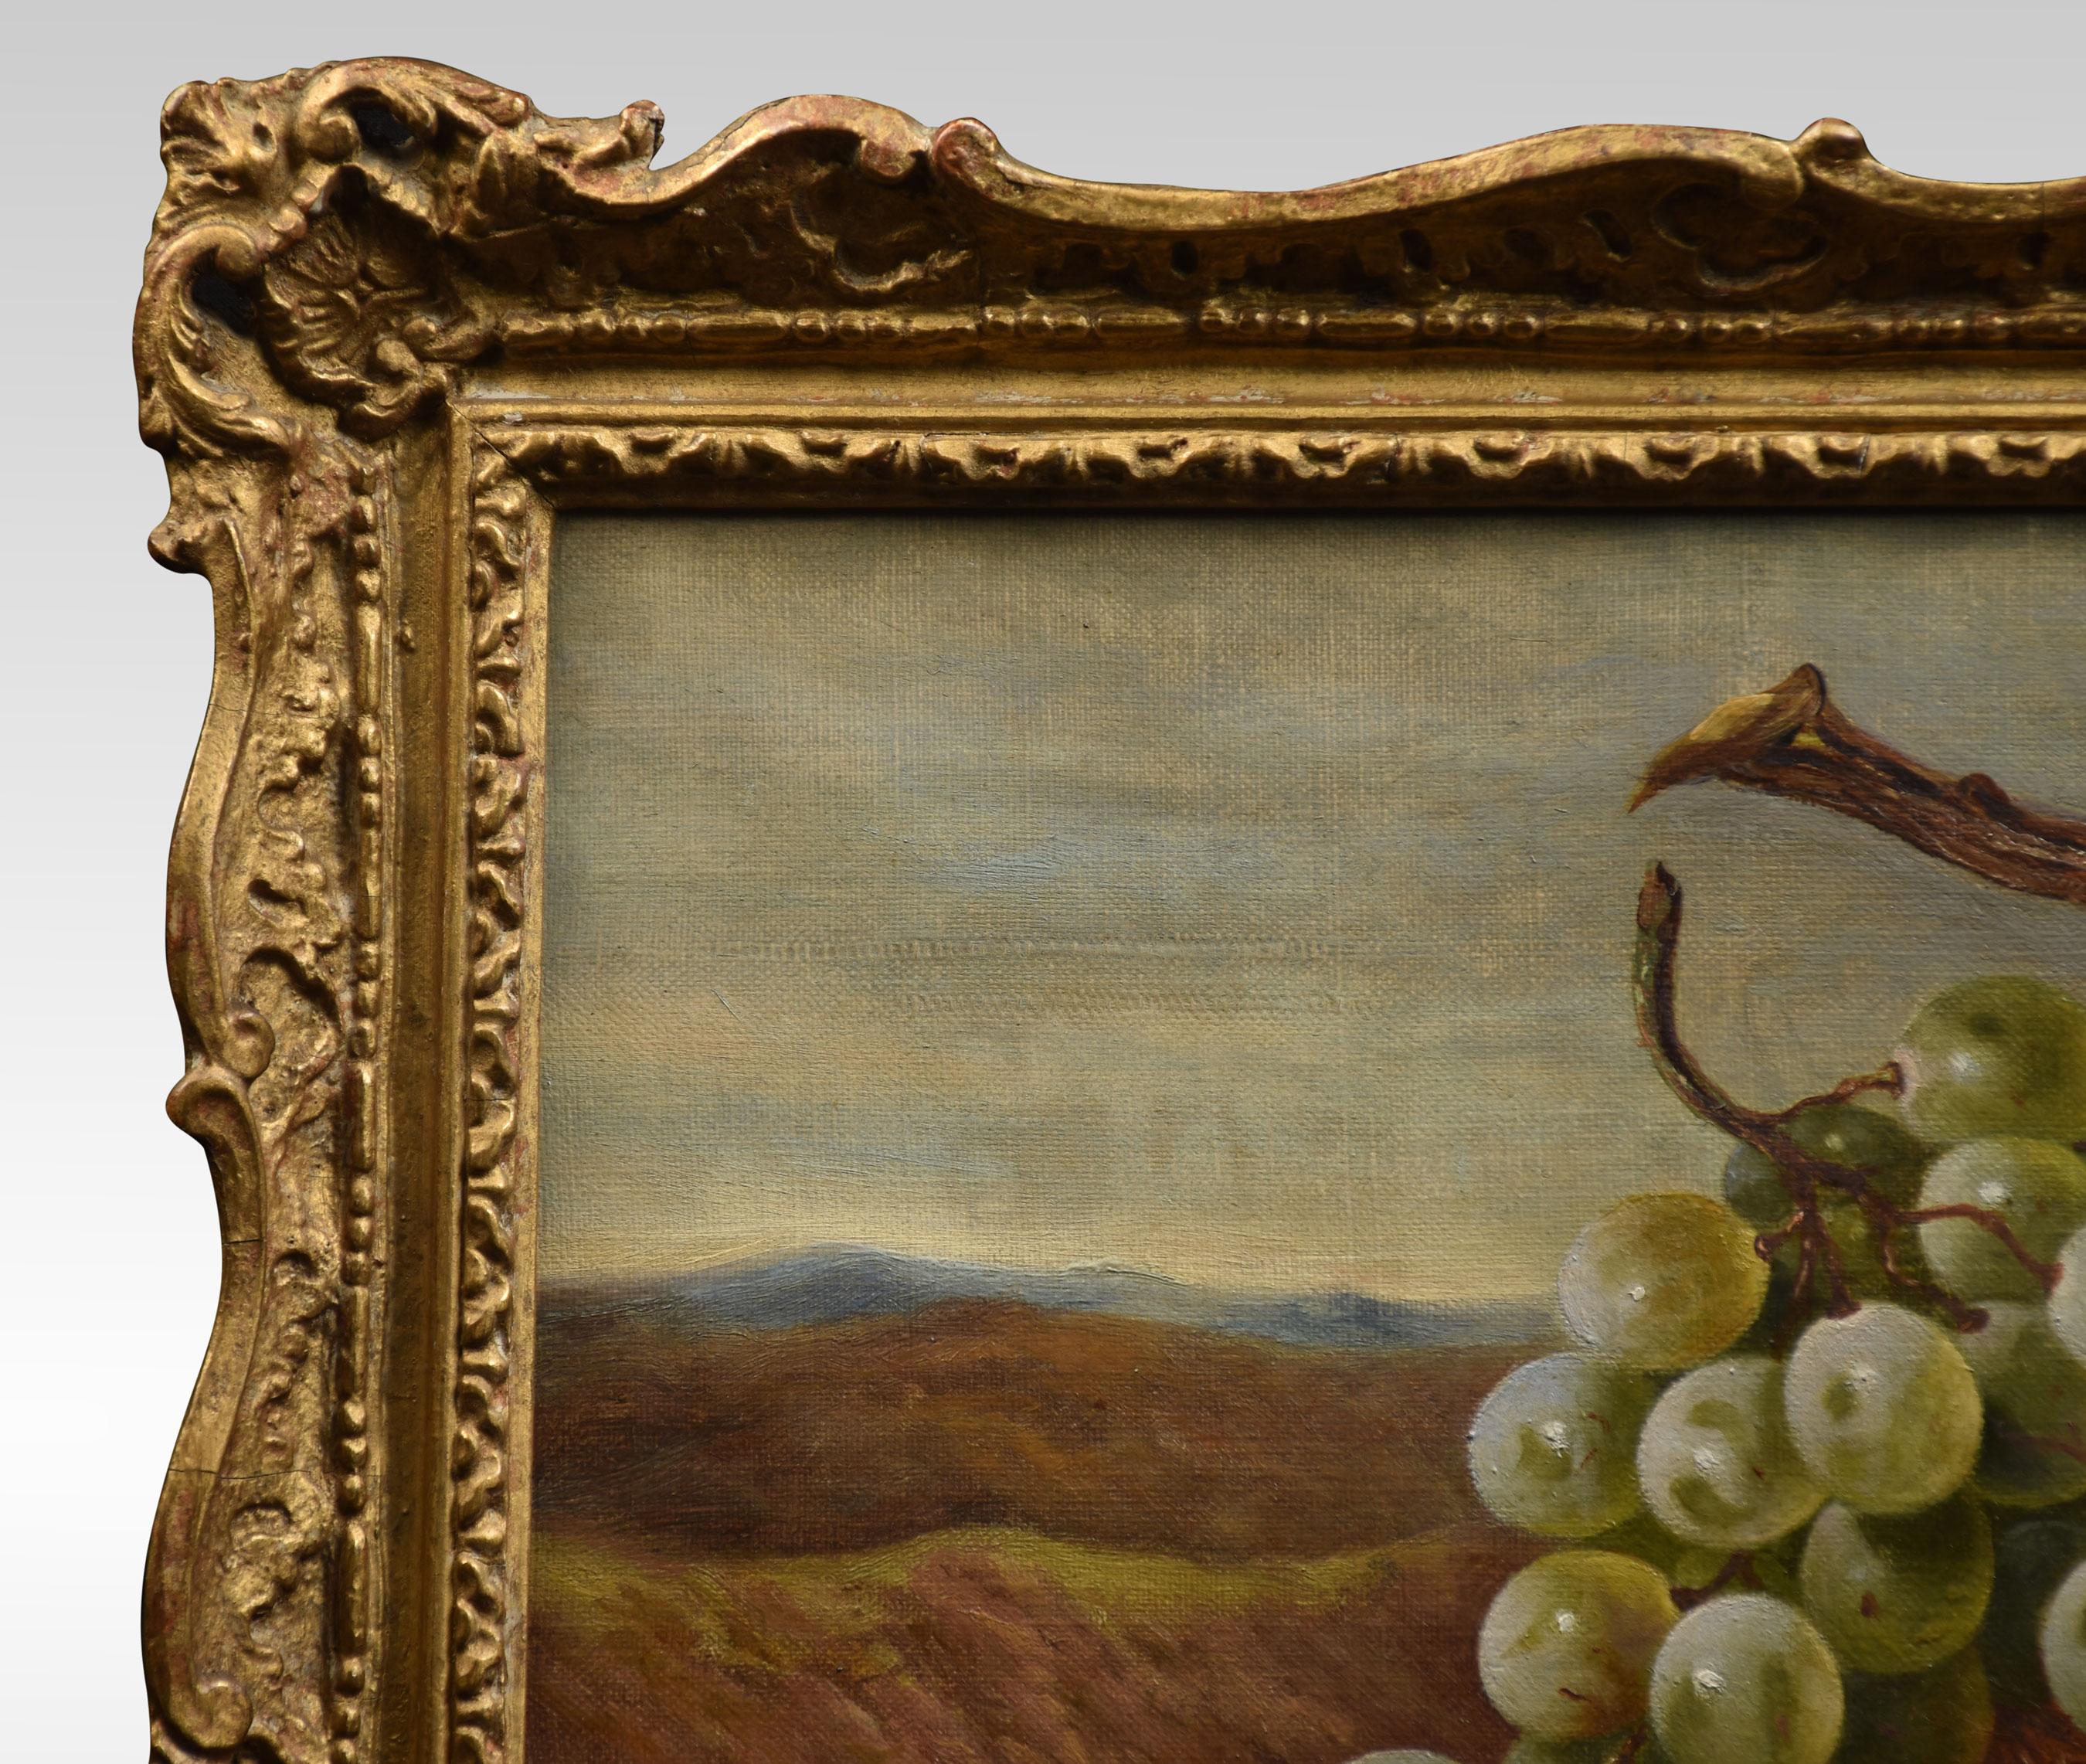 Oil on canvas gilt-framed still life of fruit, signed Thomas Hooper.
Dimensions
Height 18 inches
Width 25 inches
Depth 1.5 inches.